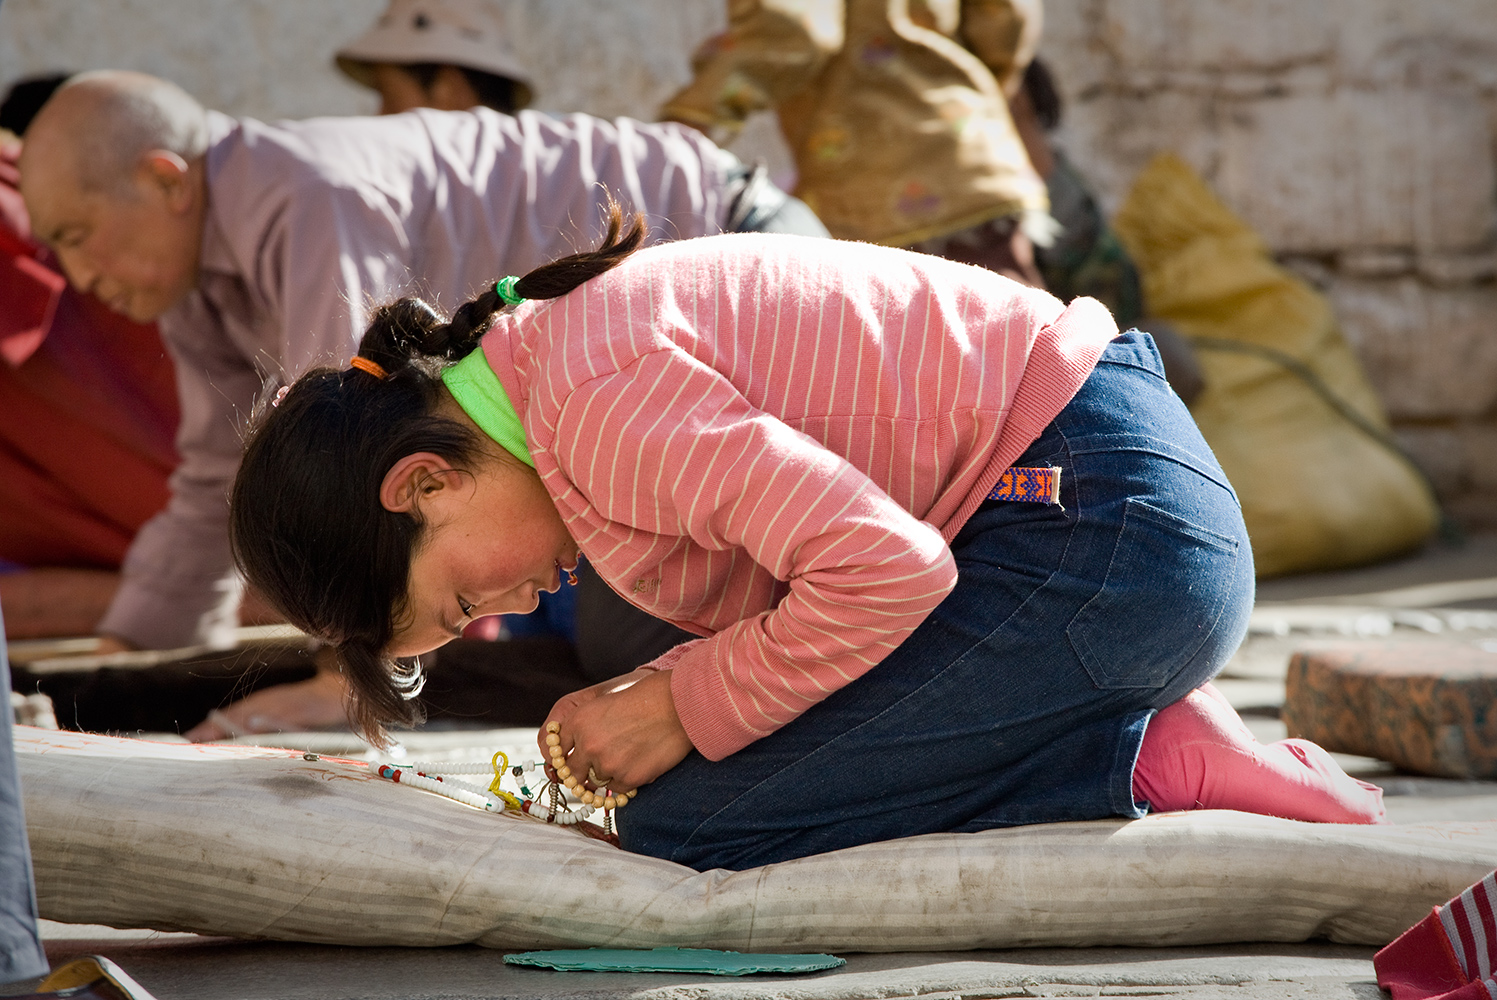  Engrossed in her mala, or prayer beads, a young pilgrim rests from her prostrating in front of the Jokhang temple in Lhasa. 